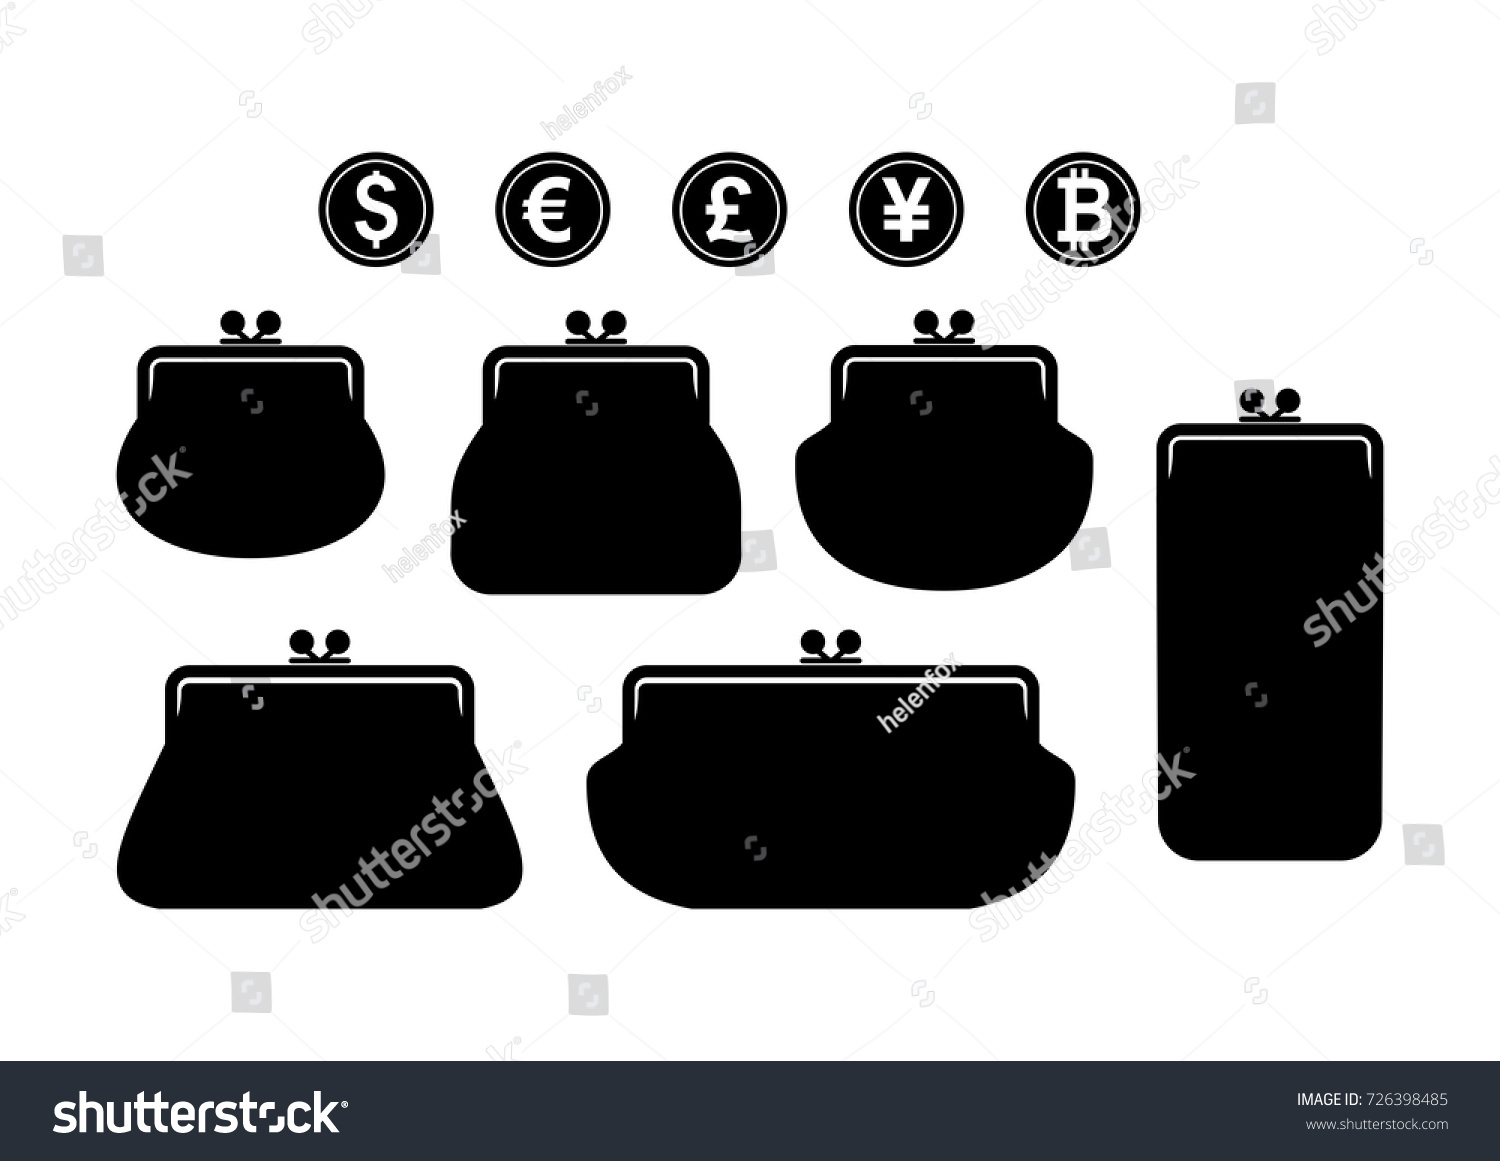 SVG of Silhouettes of wallets. Set of different wallets and coins. Wallet icon. Wallet sign with currency symbols. Vector illustration. svg